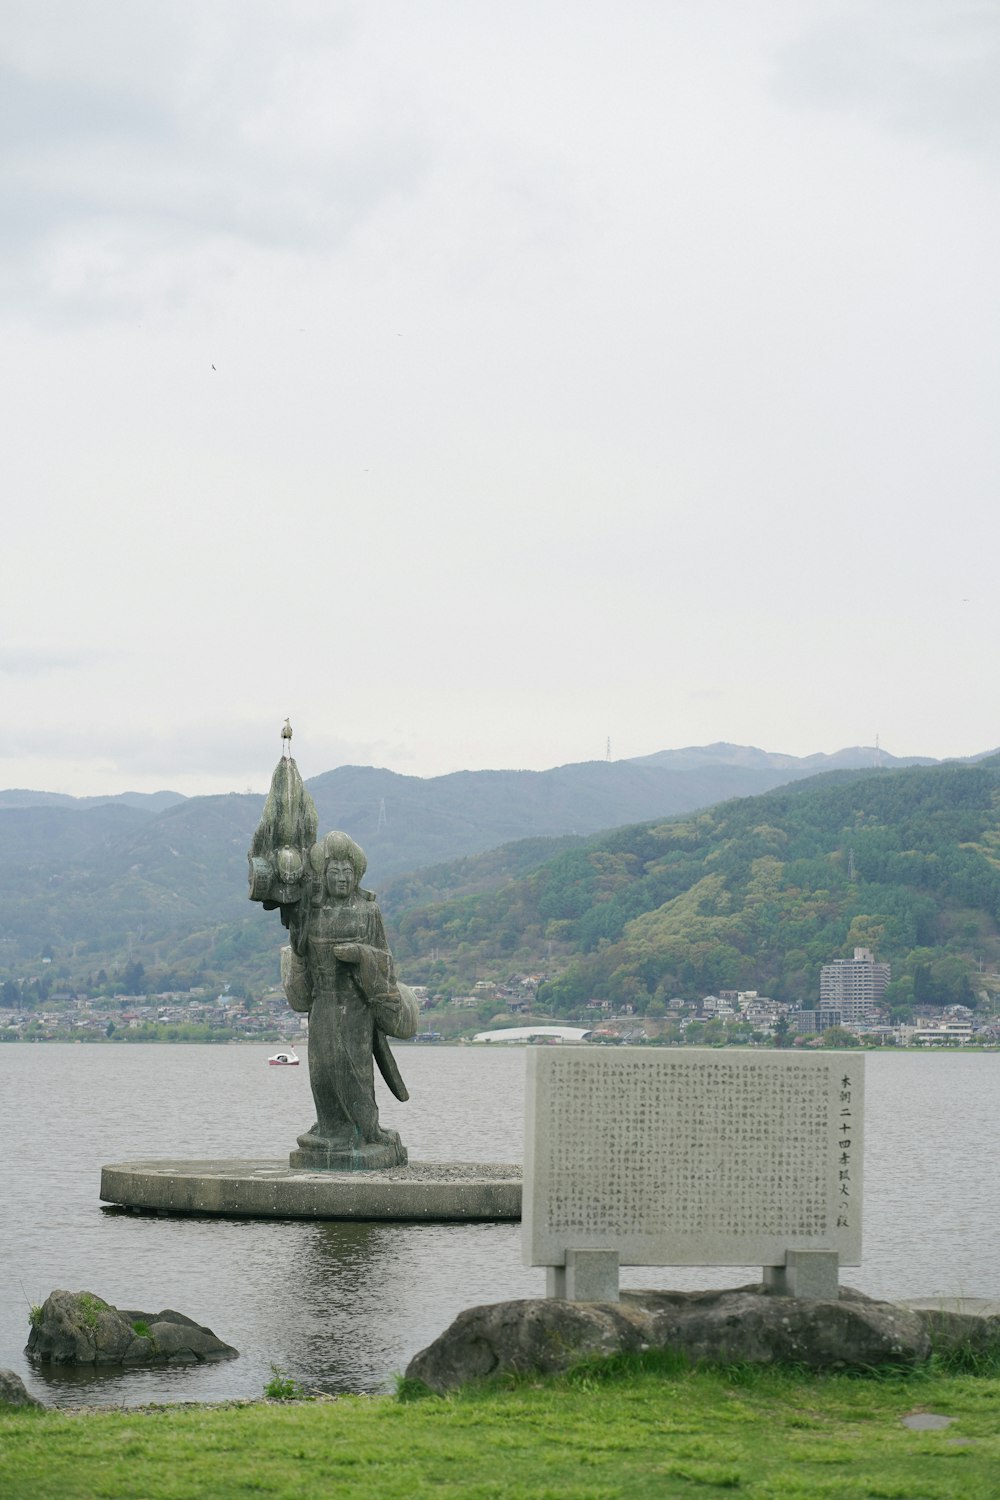 a statue in the middle of a body of water